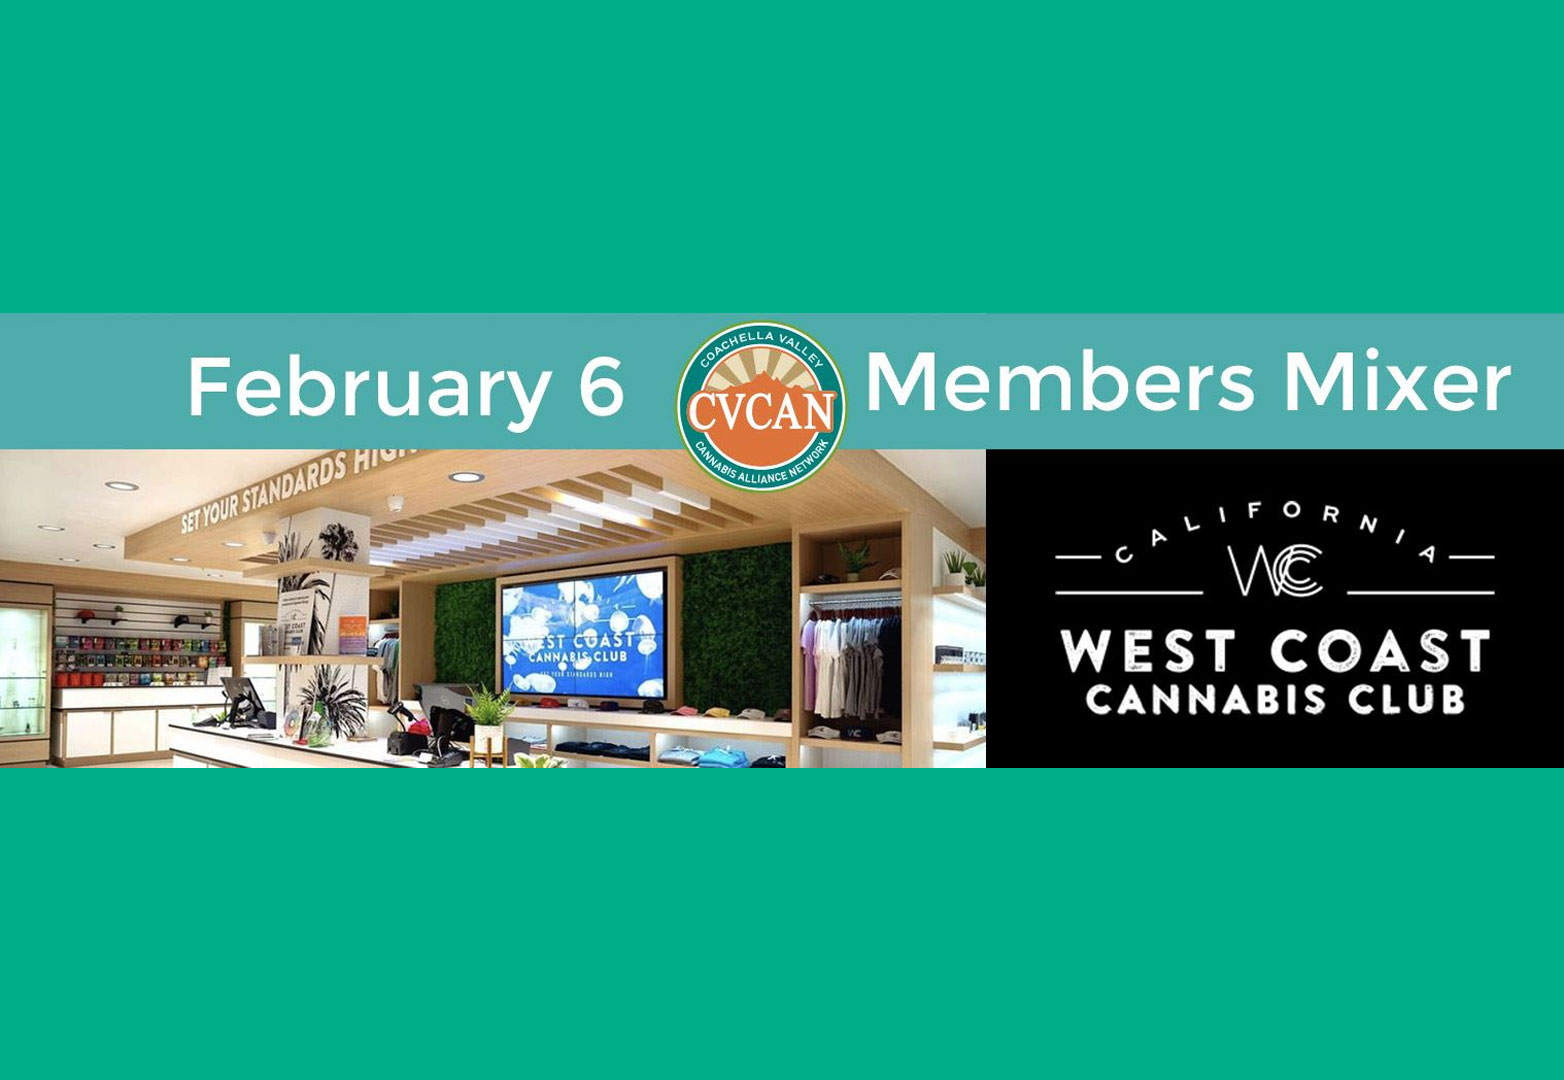 CVCAN's February 6 Members Mixer Featured Image